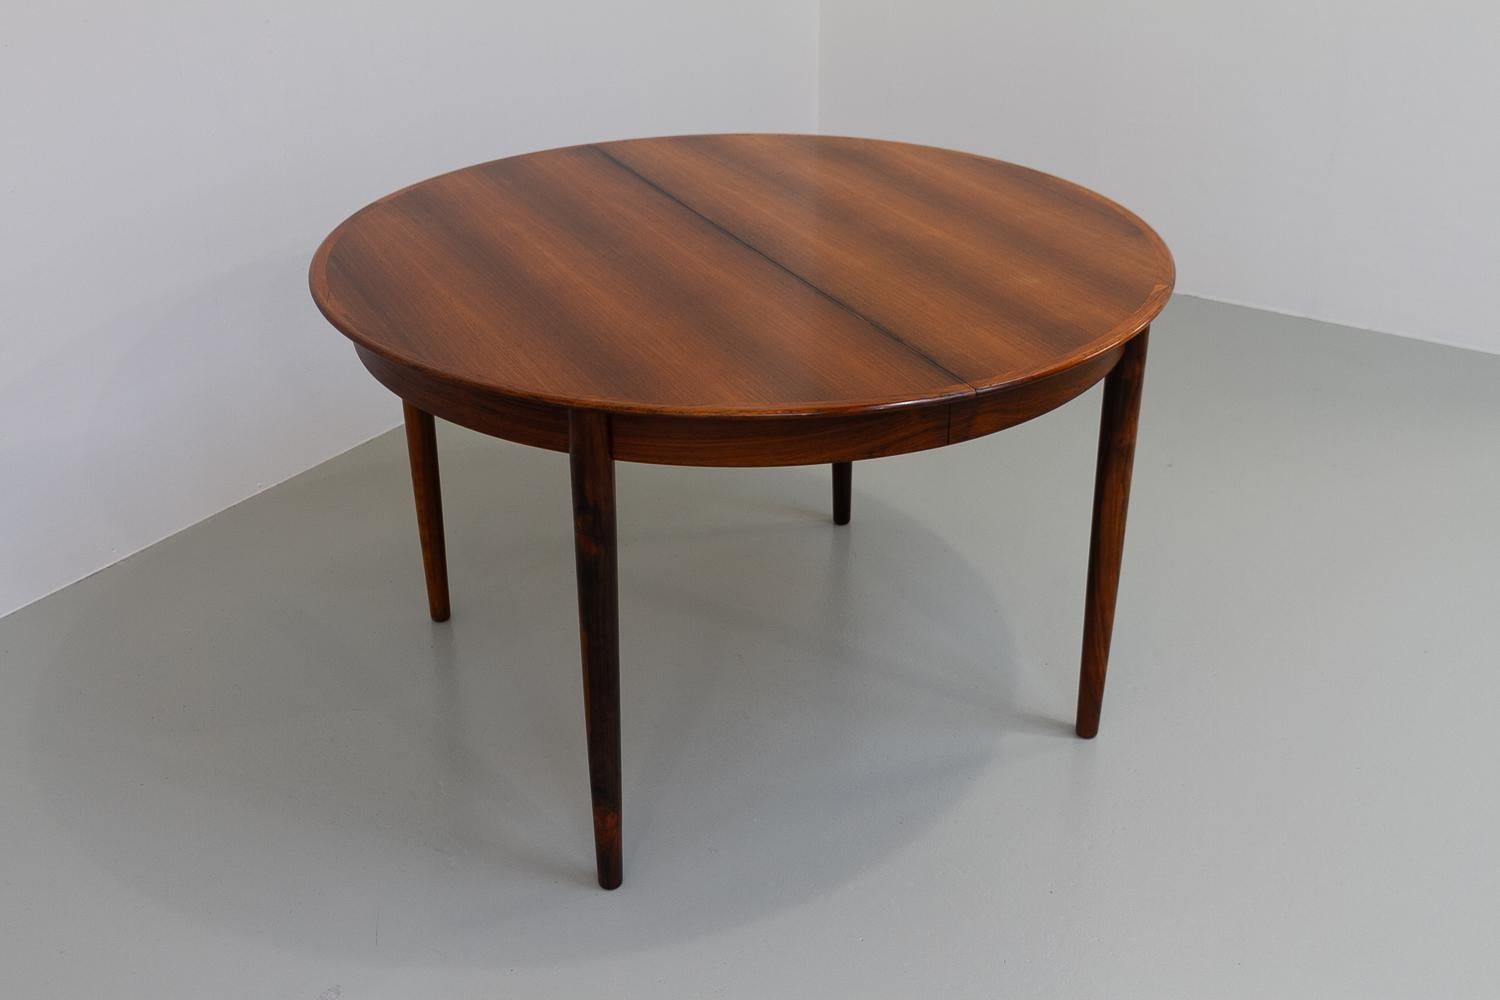 Vintage Danish Extendable Rosewood Dining Table by Skovby, 1960s. 

Beautiful Danish Mid-Century Modern Rosewood/palisander round dining table with extension leaves made by Skovby Møbelfabrik, Denmark, in the 1960s.
This table comes with three